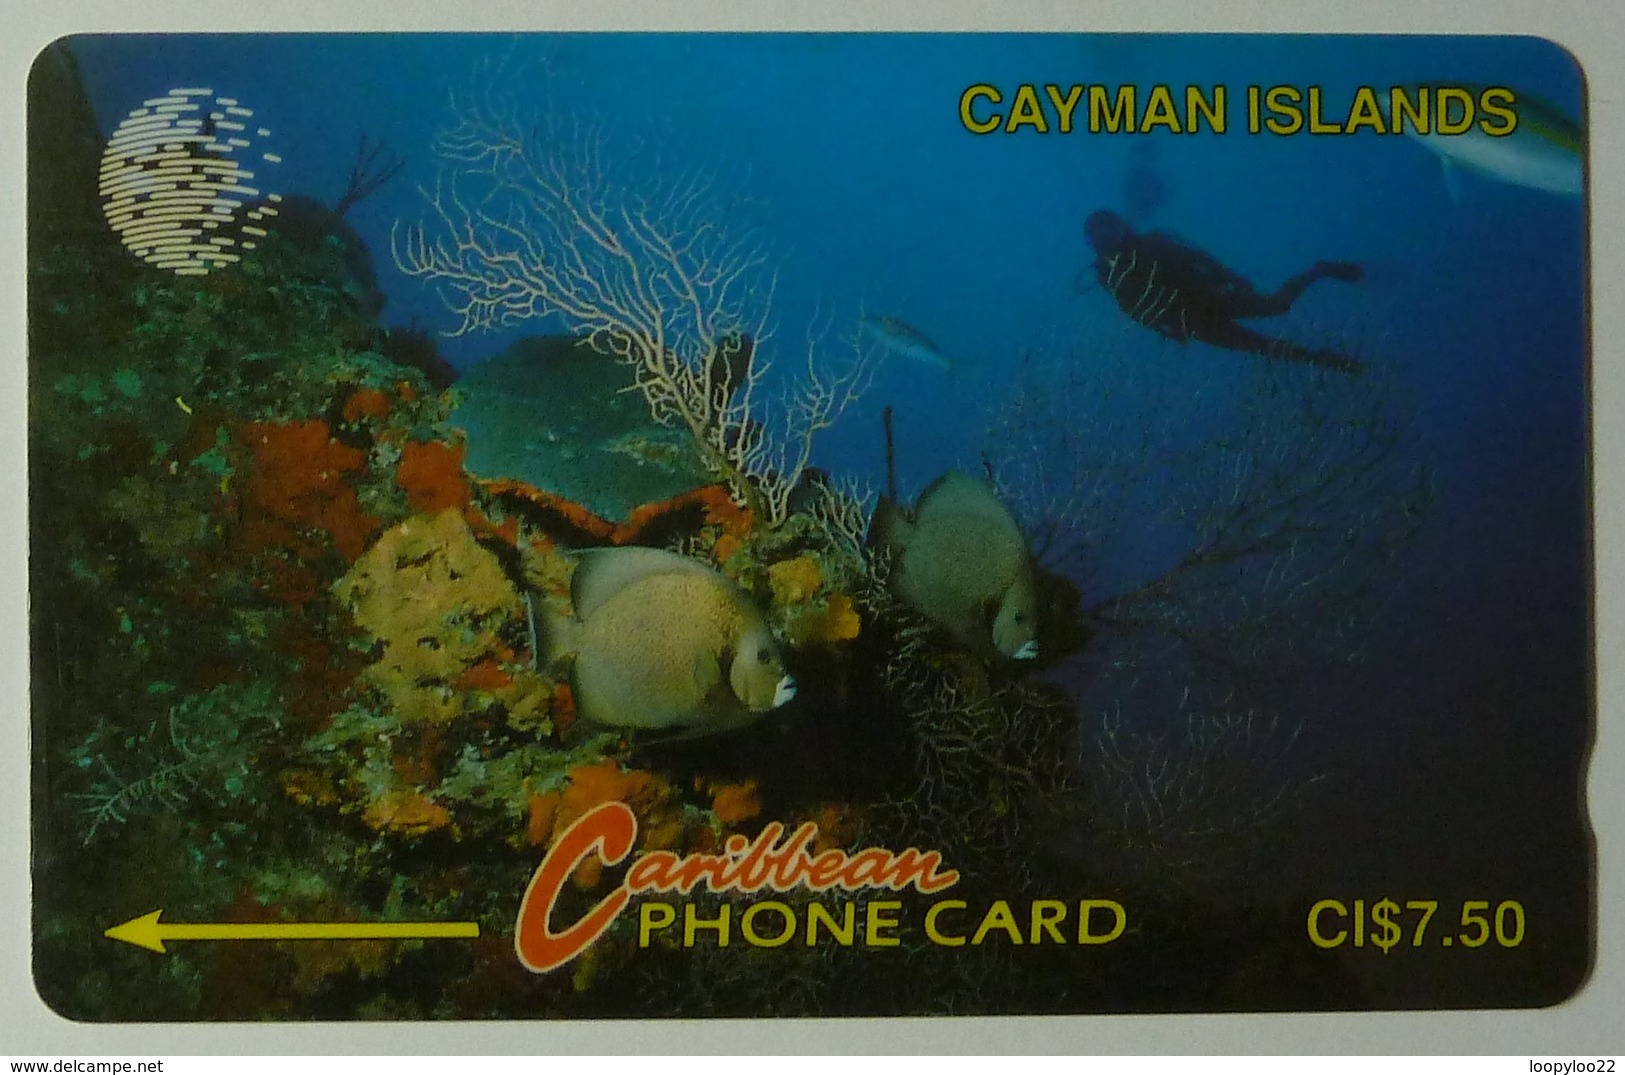 CAYMAN ISLANDS - GPT - CAY-5A - Underwater - Diver - 5CCIA - $7.50 - Used - Cayman Islands